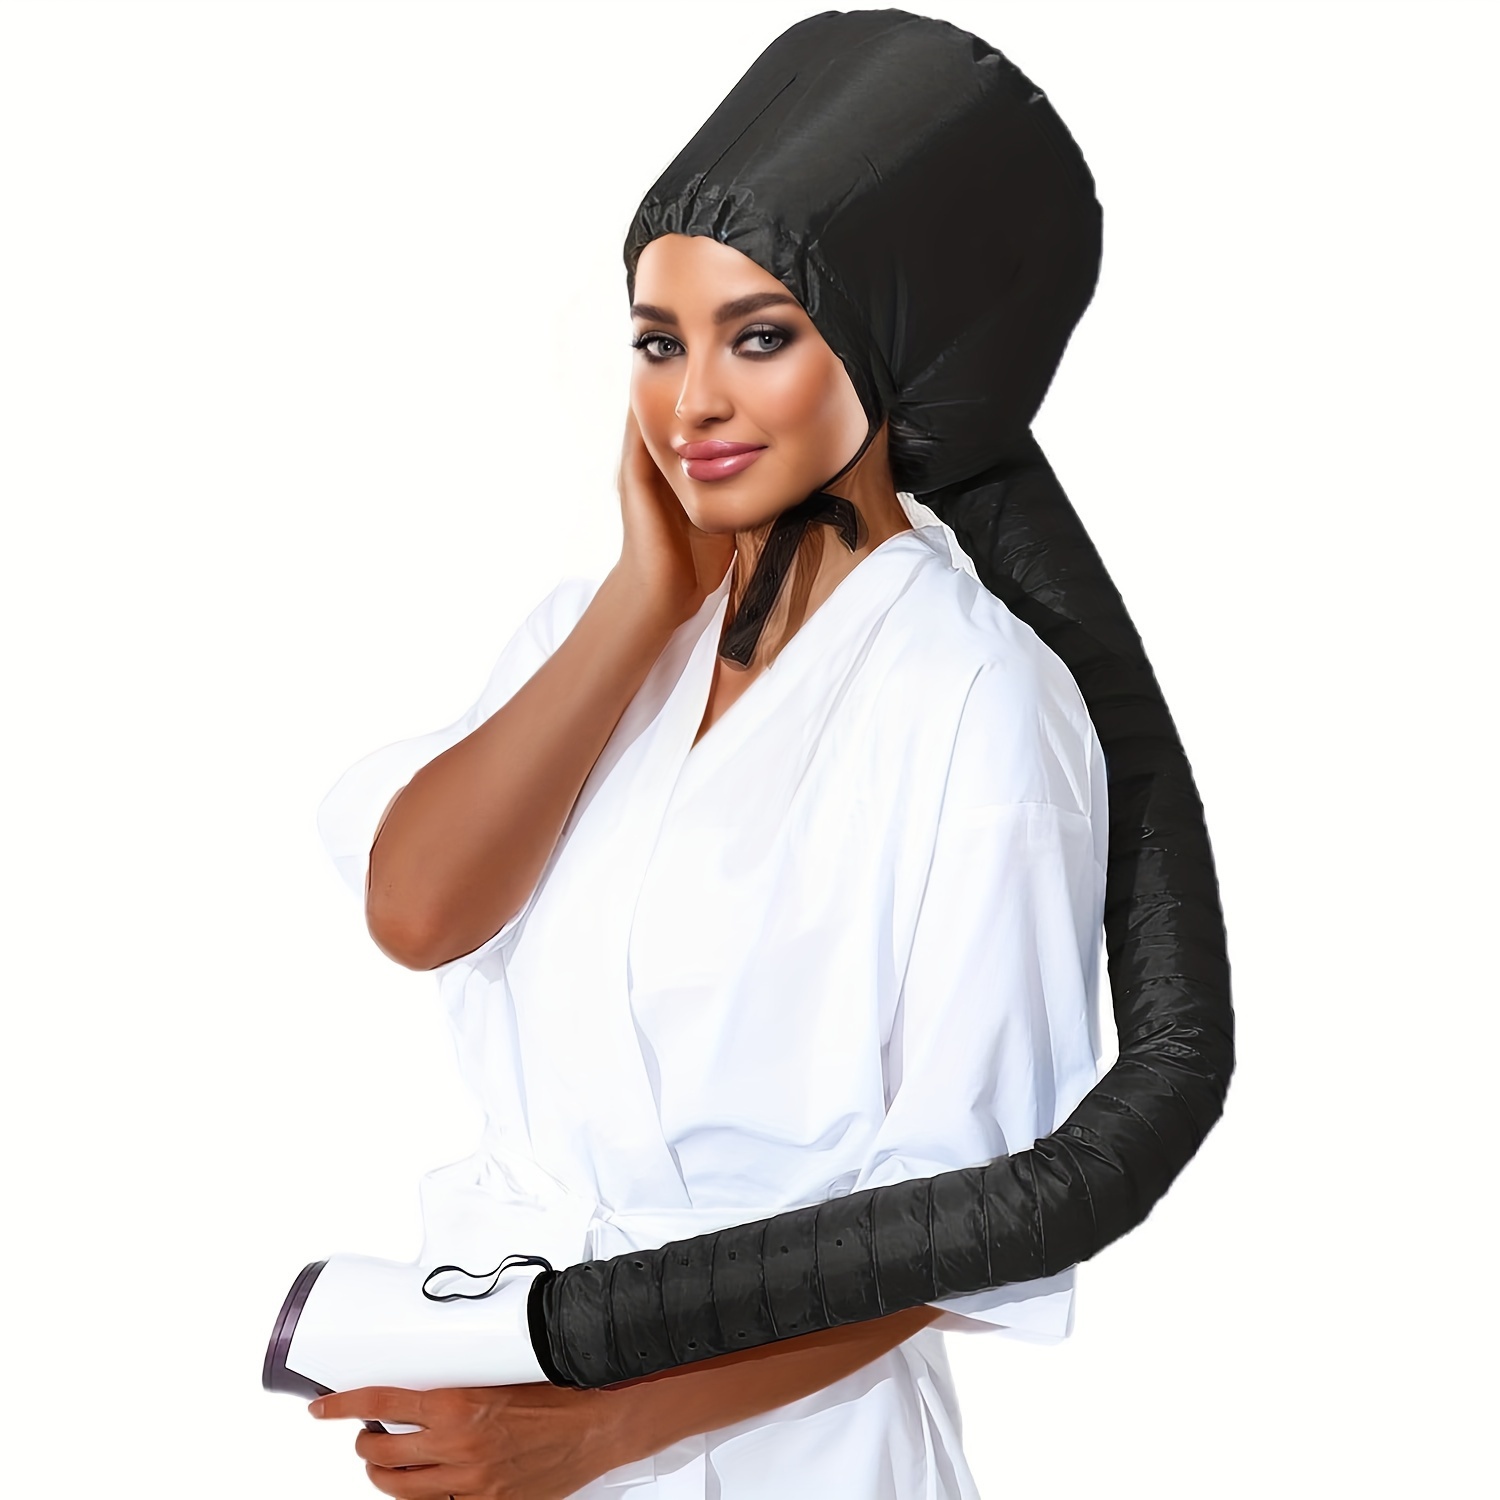 

Bonnet Hood Hair Dryer Attachment - Hair Dryer Bonnet With Elastic Strap, Used For Hair Styling, Deep Conditioning And Hair Drying